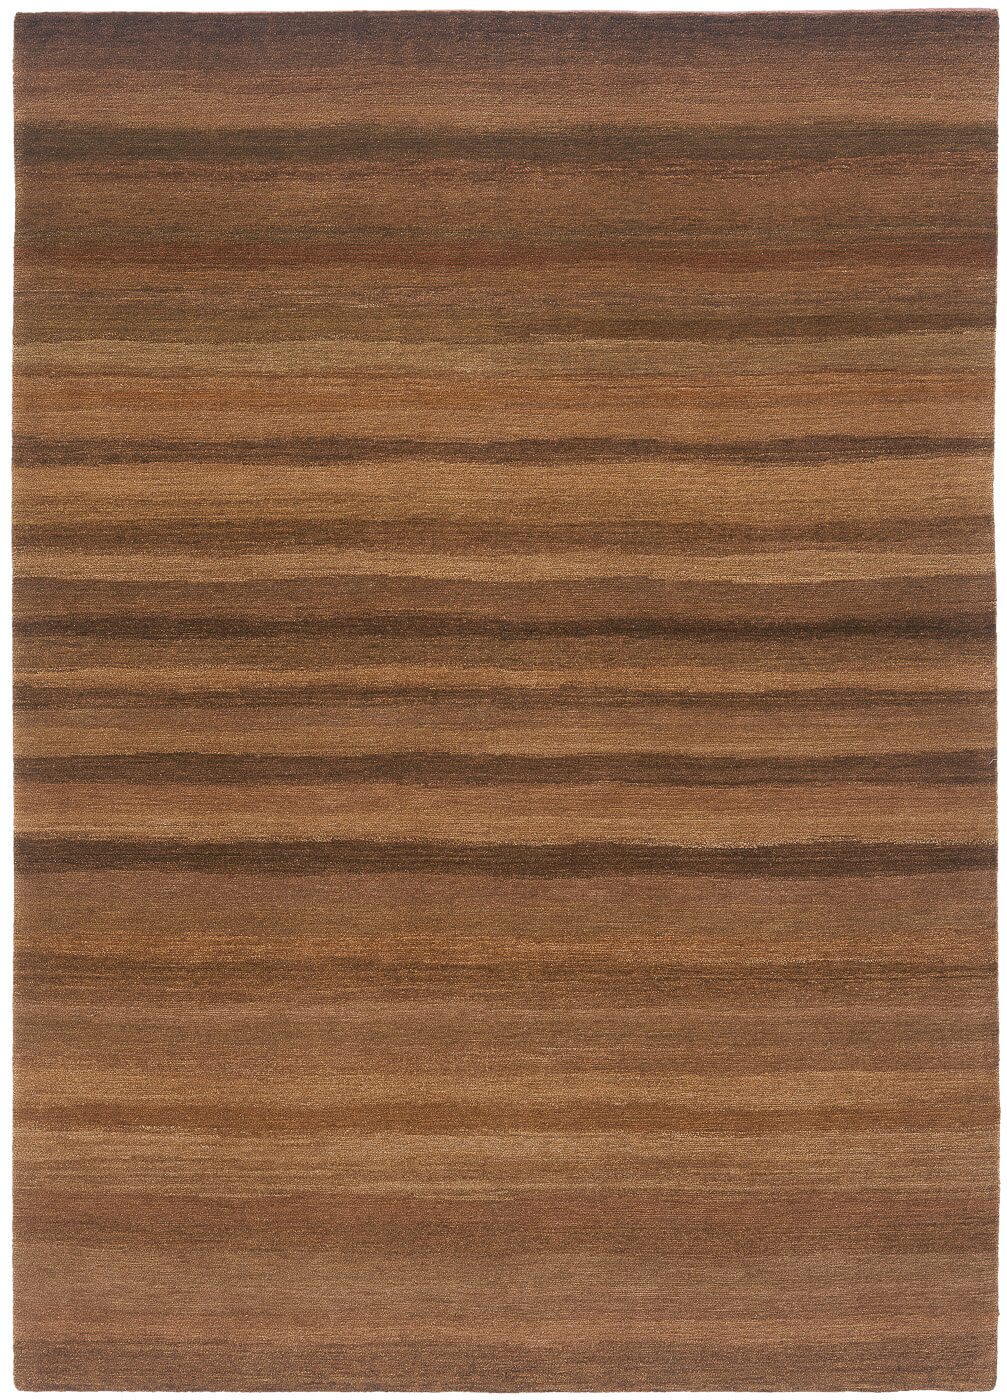 Brown Striped Hand-woven Luxury Rug